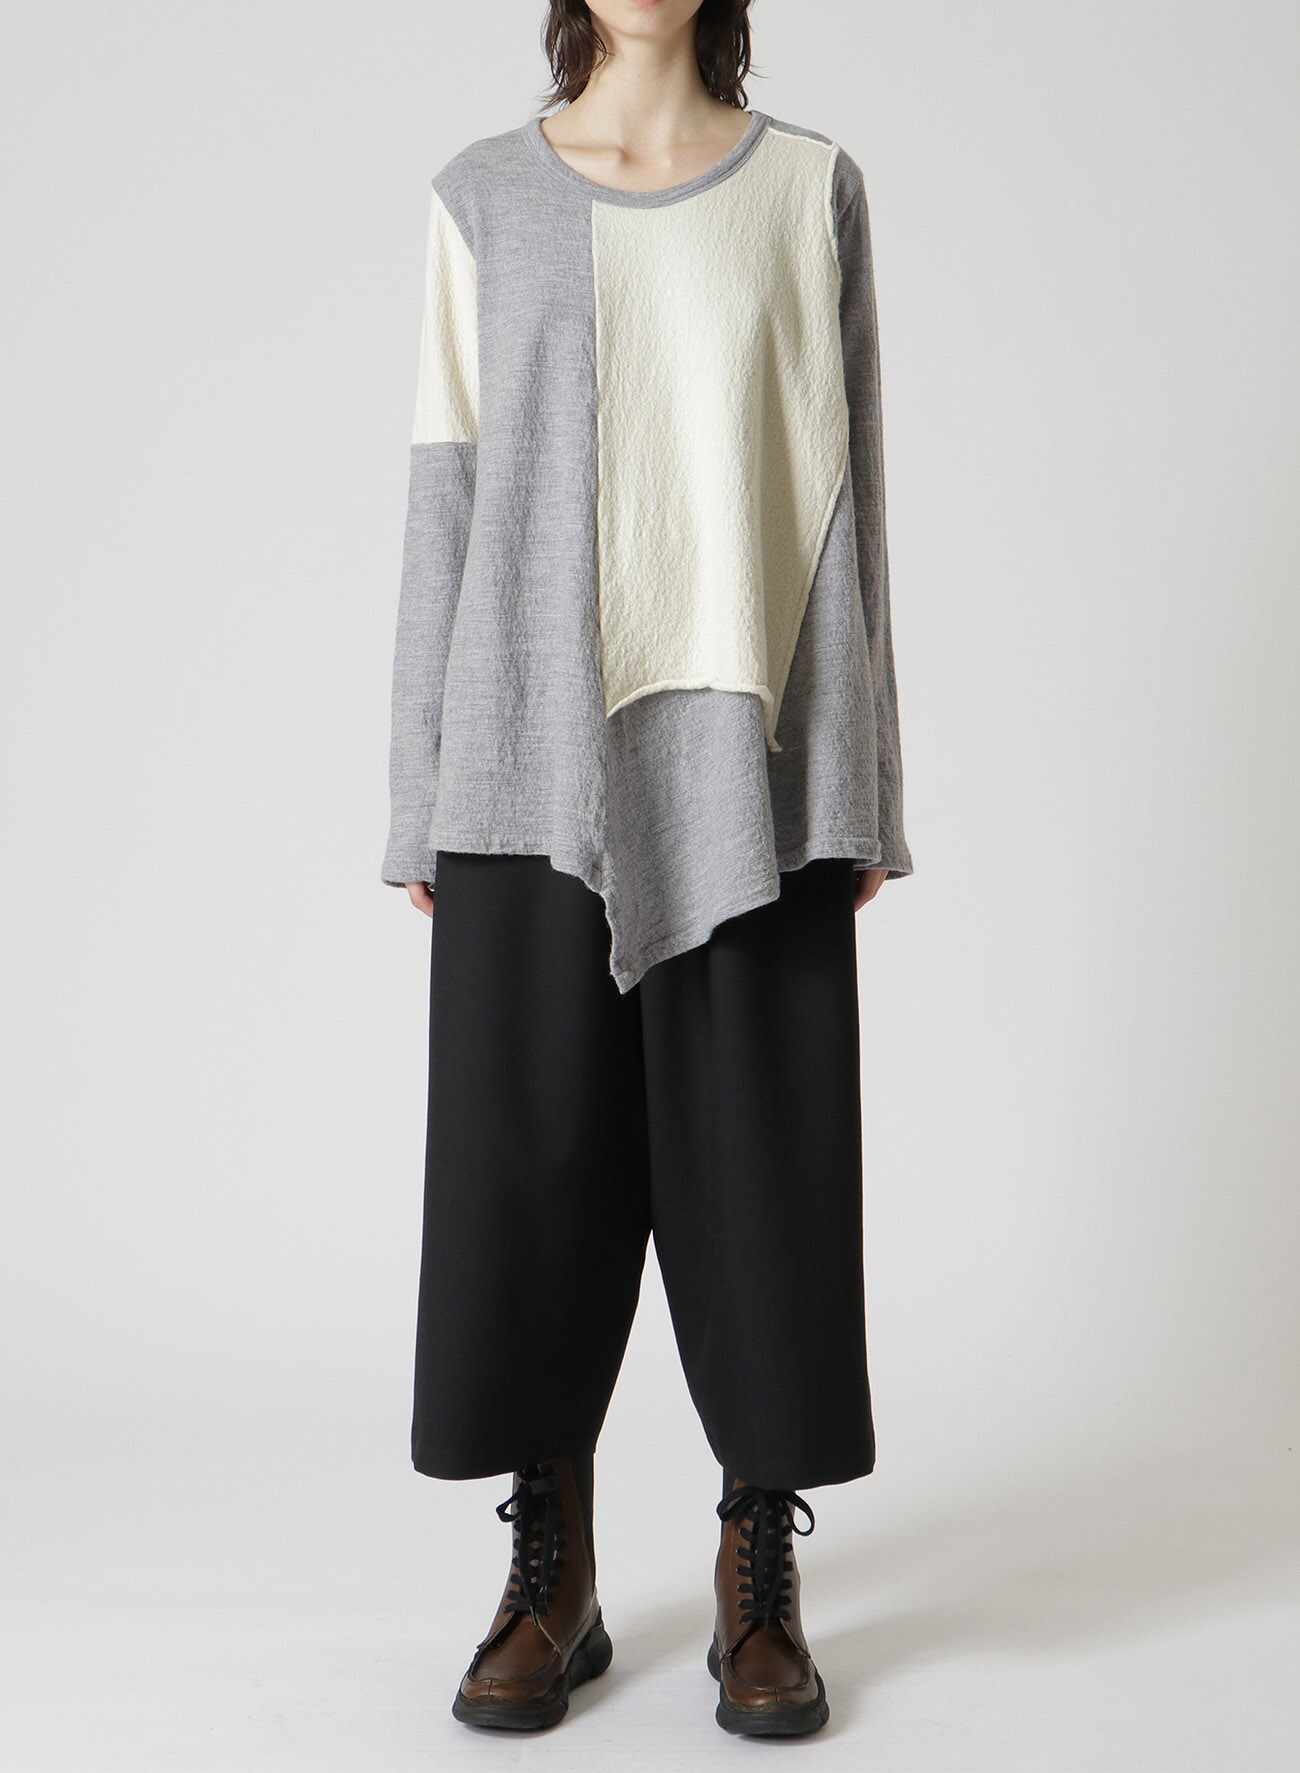 PLAIN STITCH COLOUR PRODUCT SHRINKAGE ROUND NECK FLARE PATCHED T